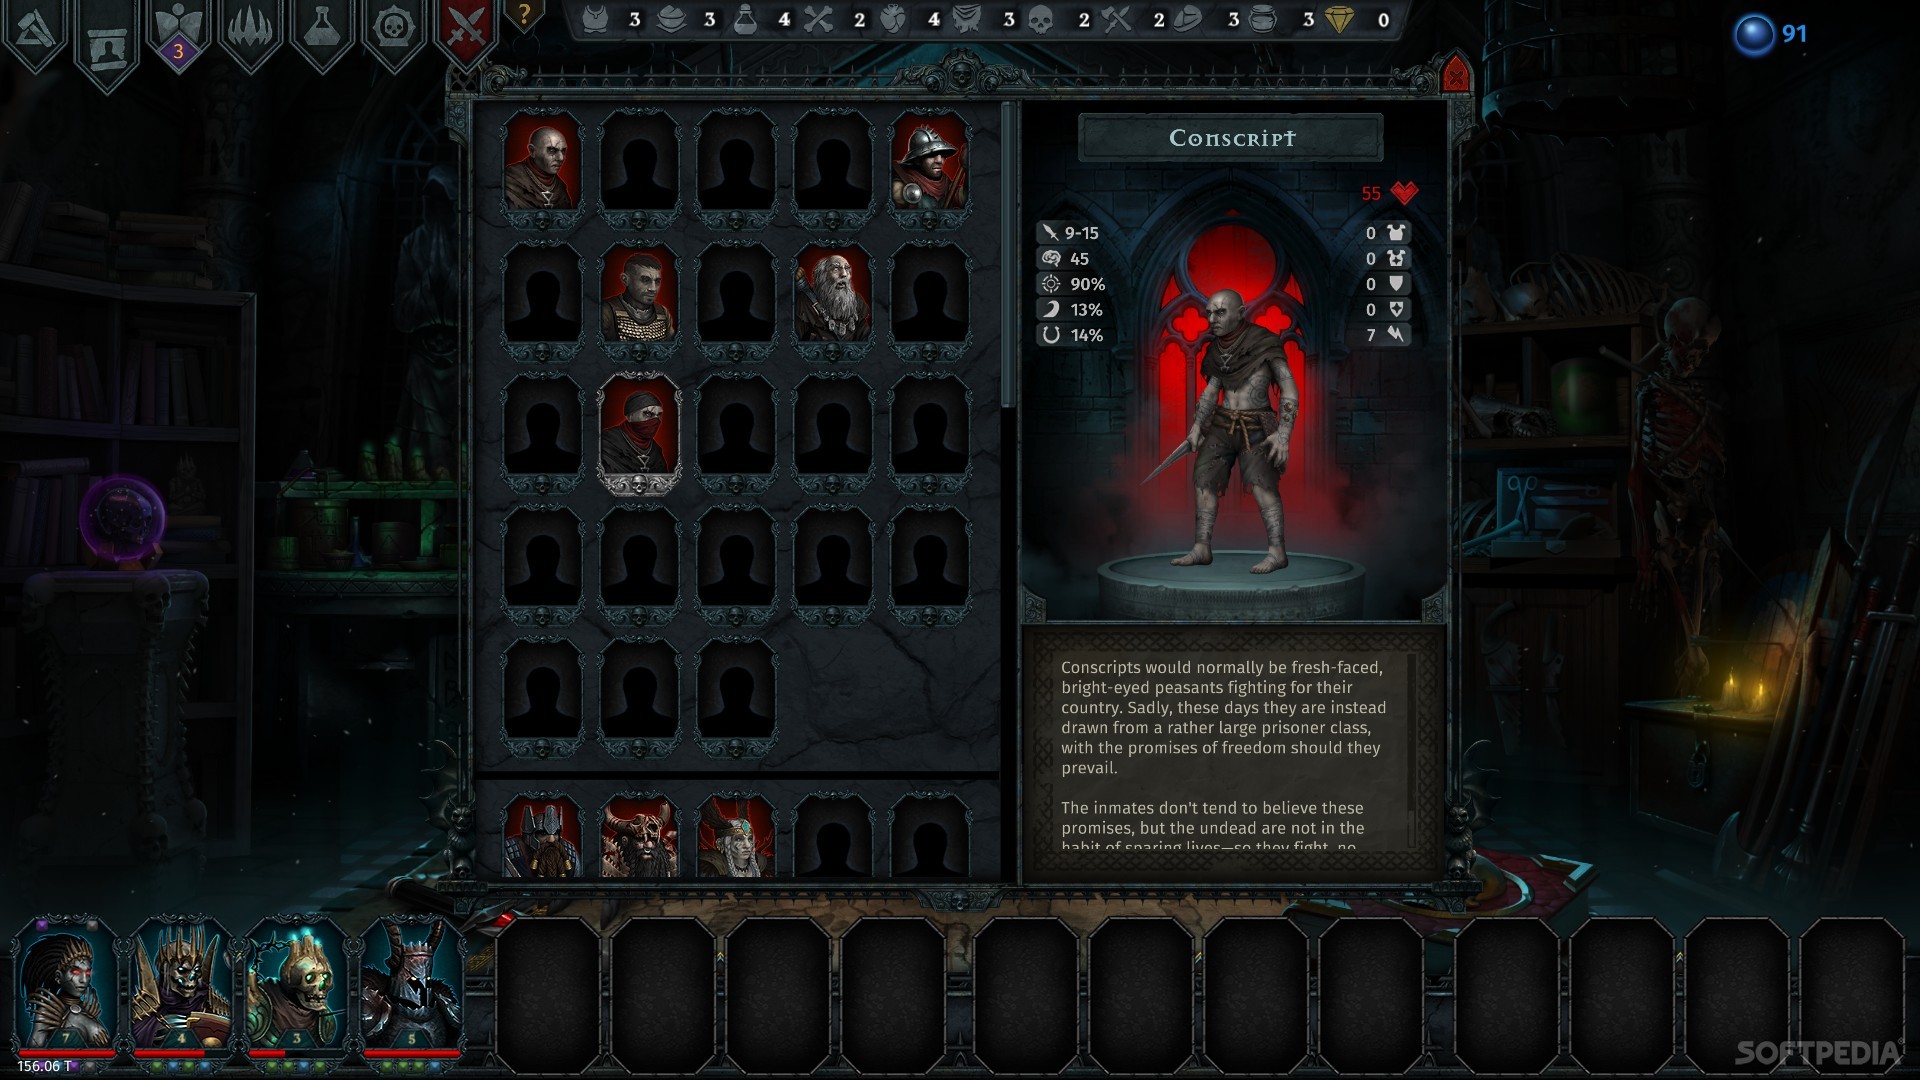 Iratus: Lord of the Dead instal the new for mac